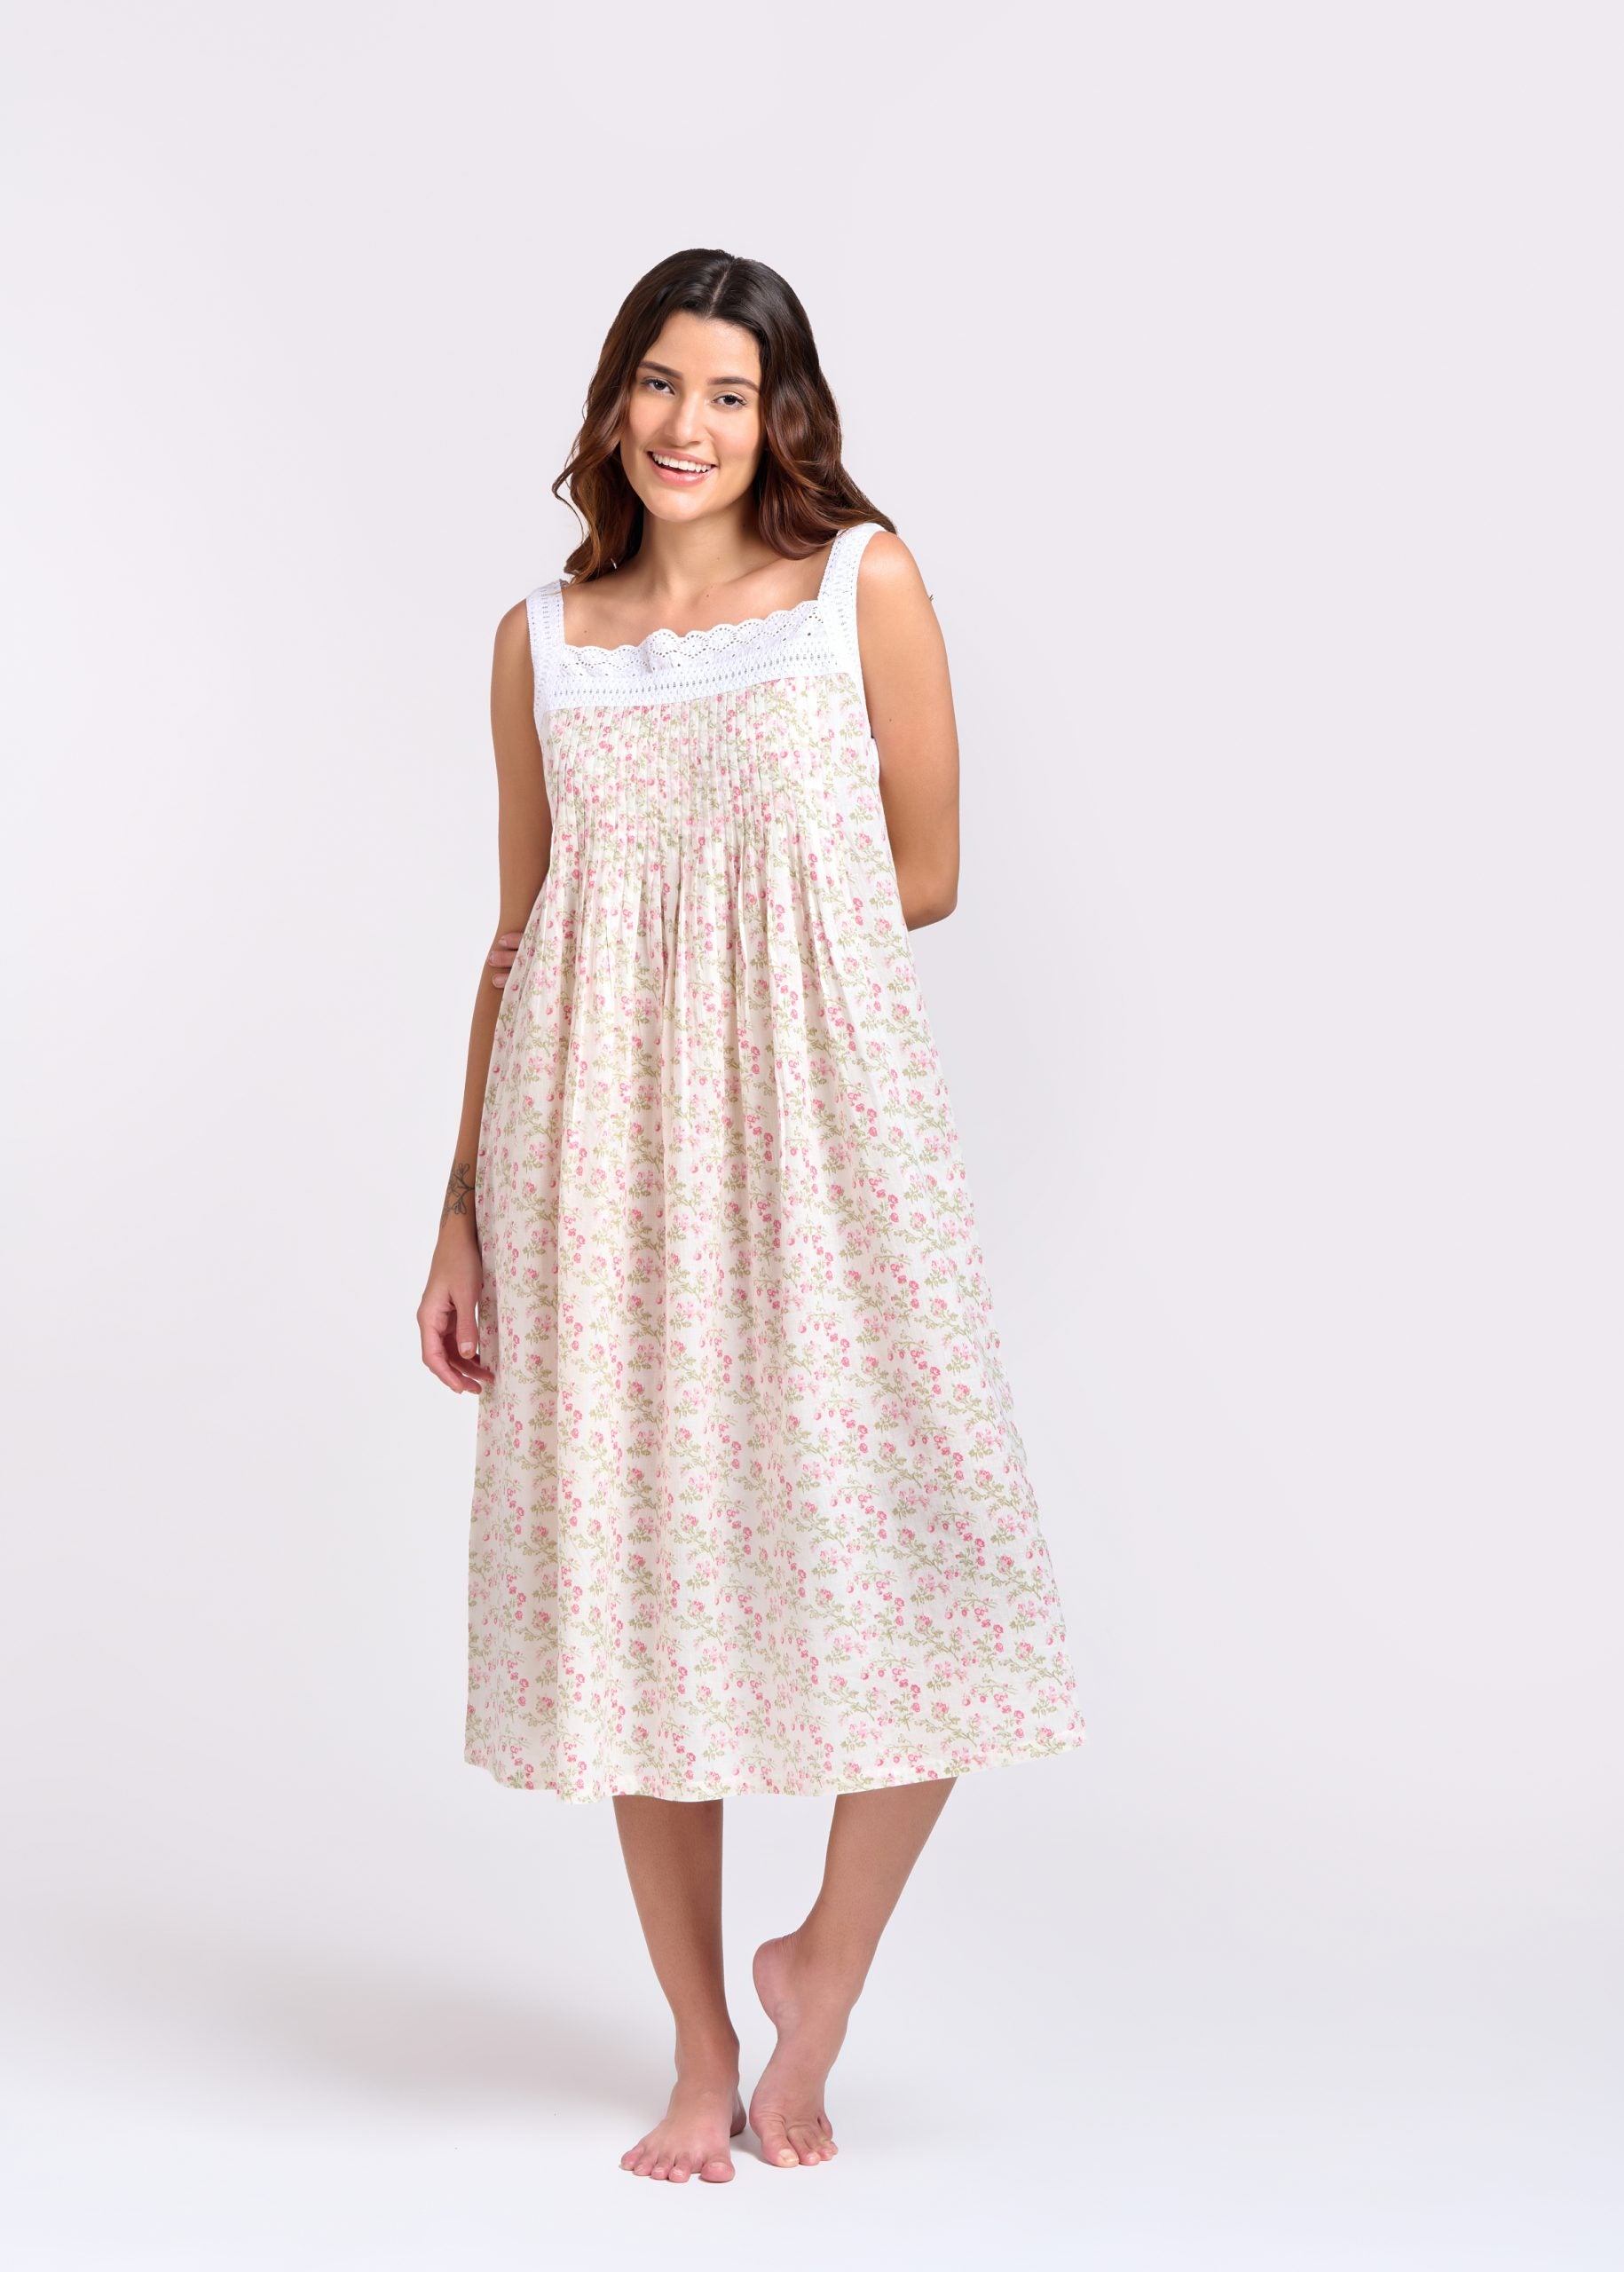 Hand Block Printed Lace Nightie - Soft Pink Floral